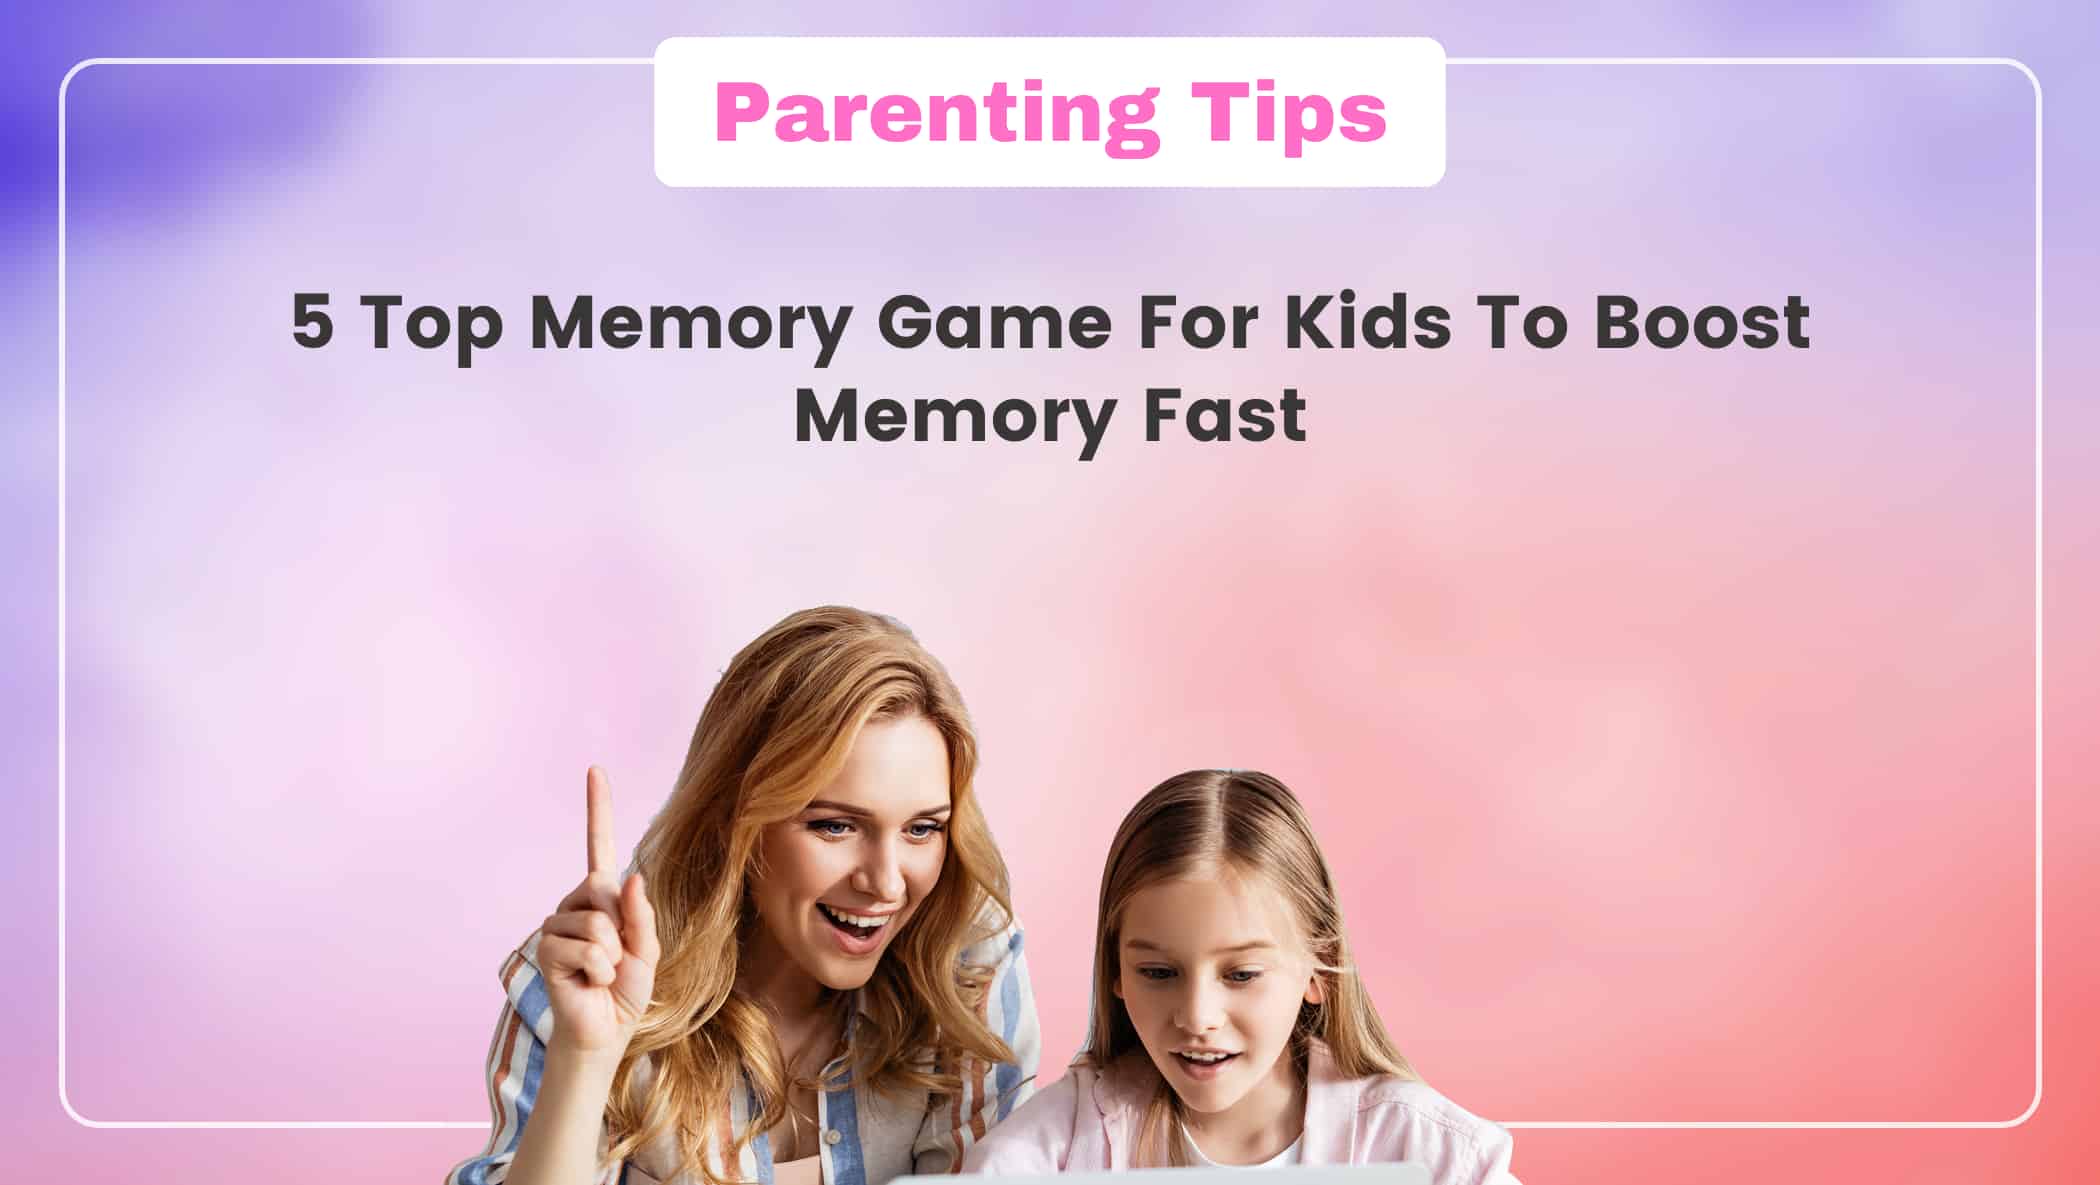 10 Kids Memory Games To Help Improve Memory, Concentration & Thinking Skills